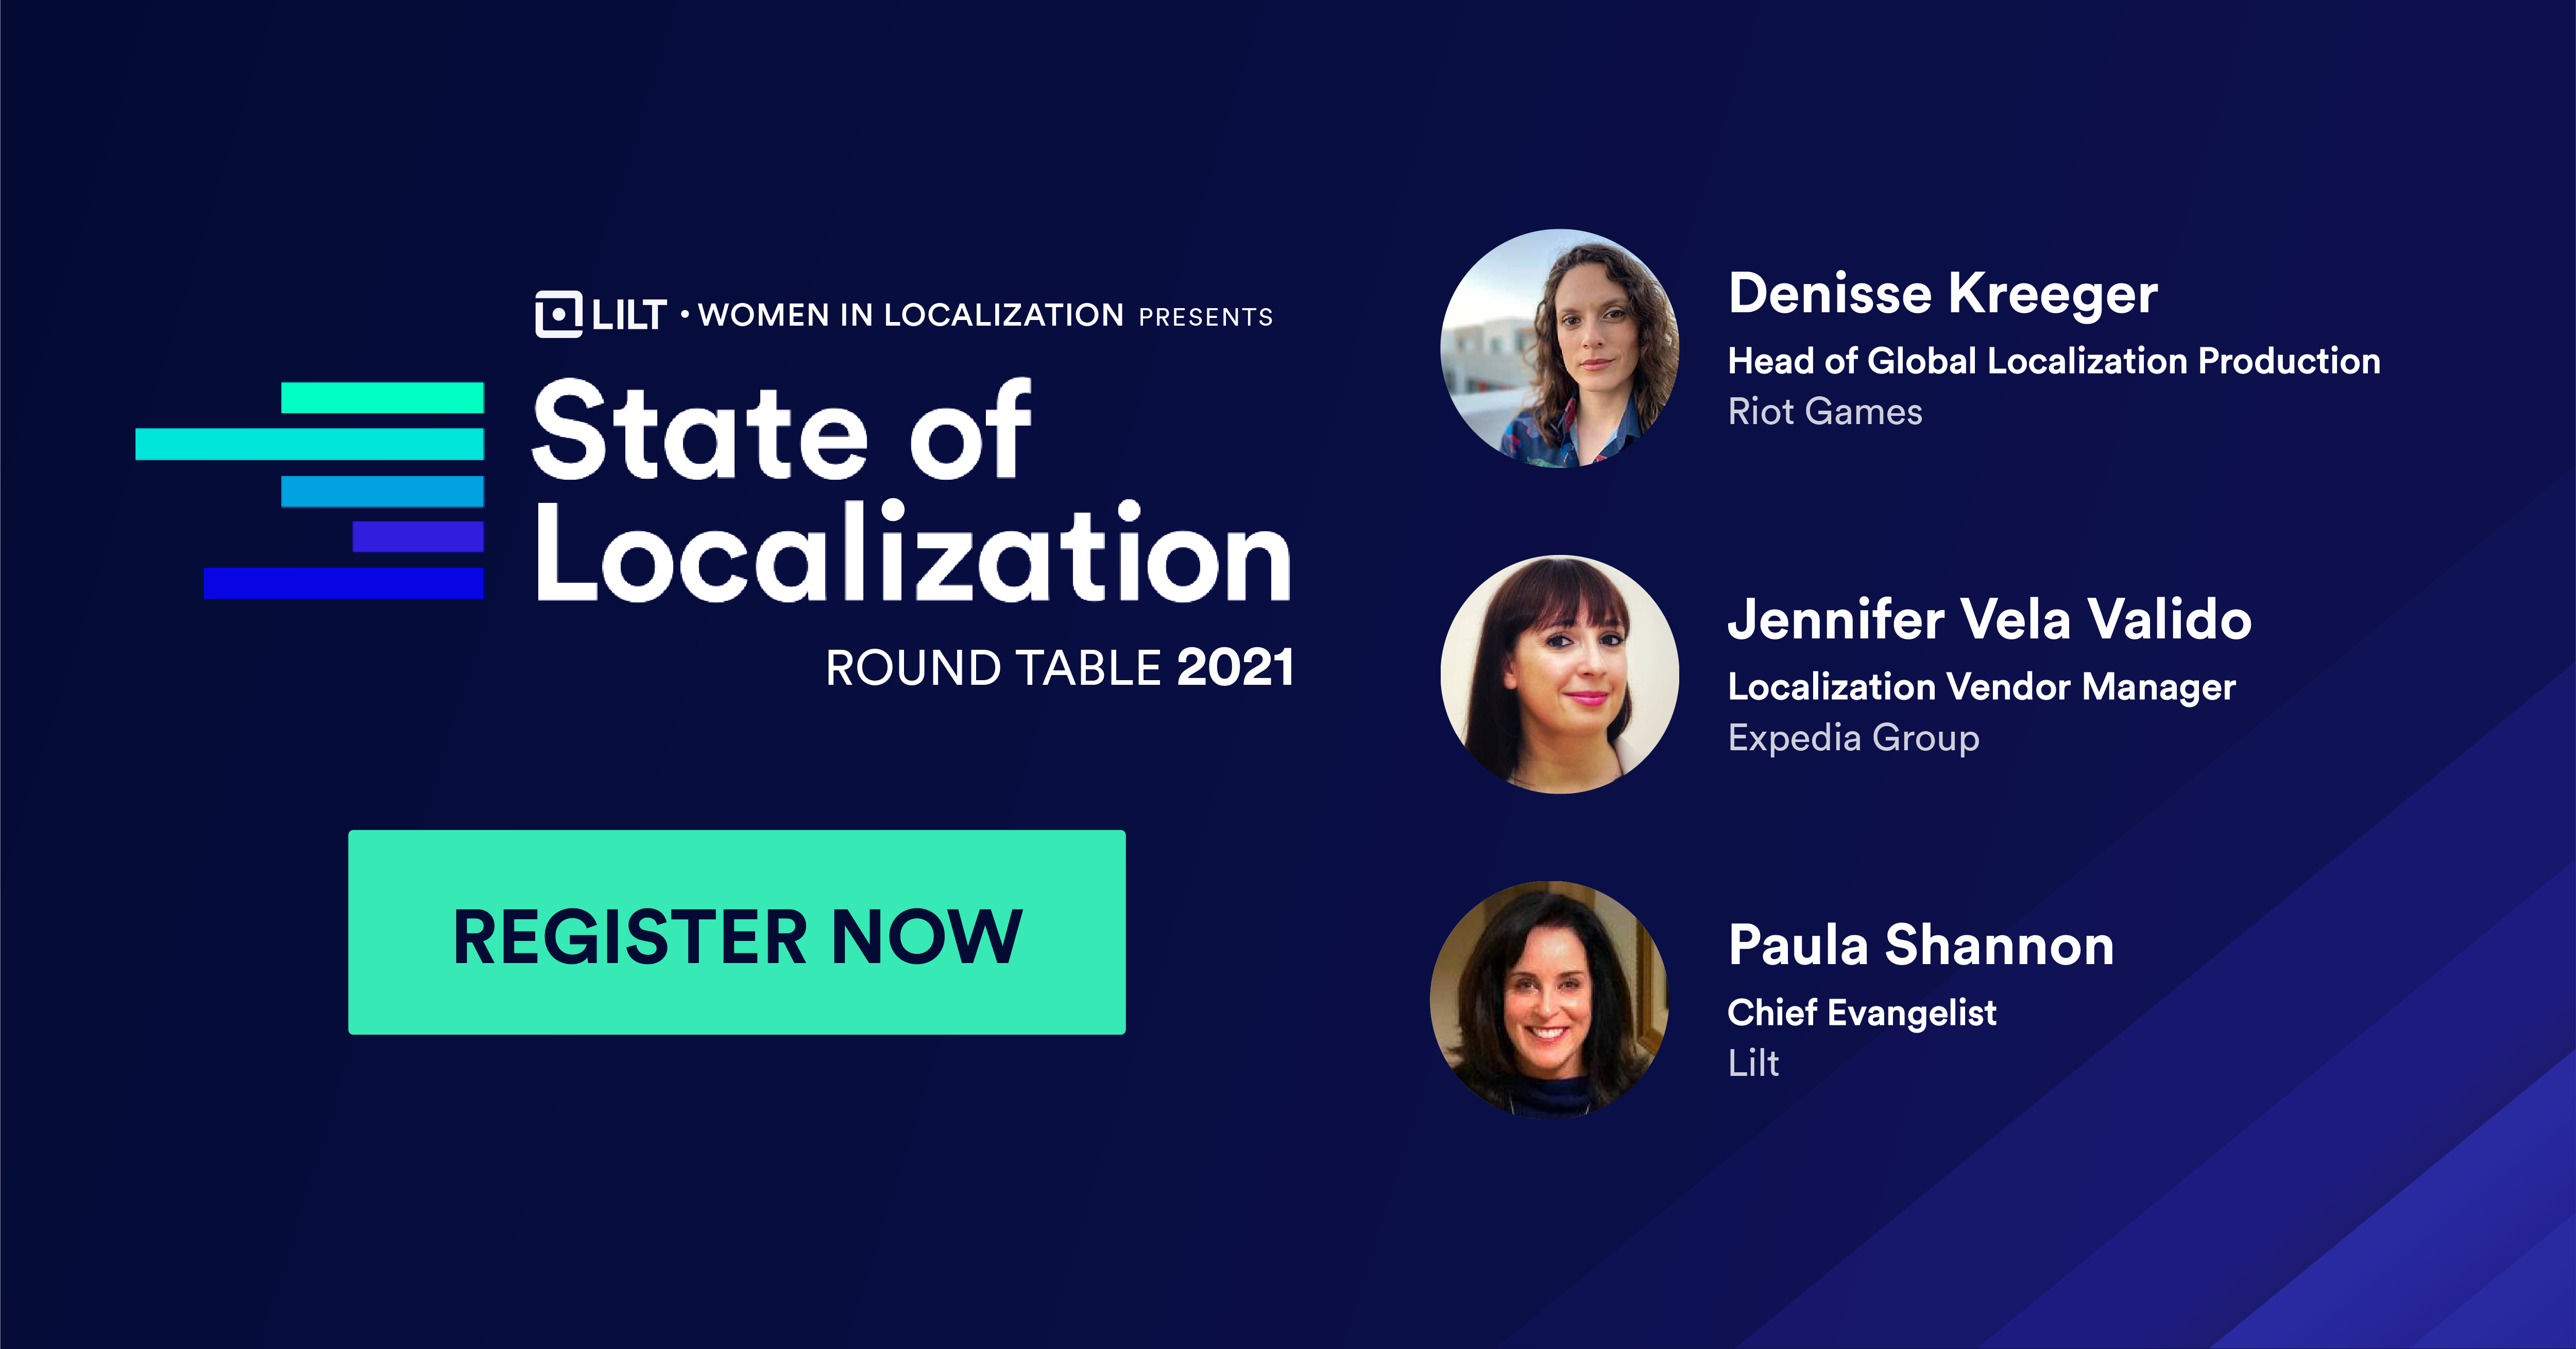 State of Localization 2021 Round Table Discussion